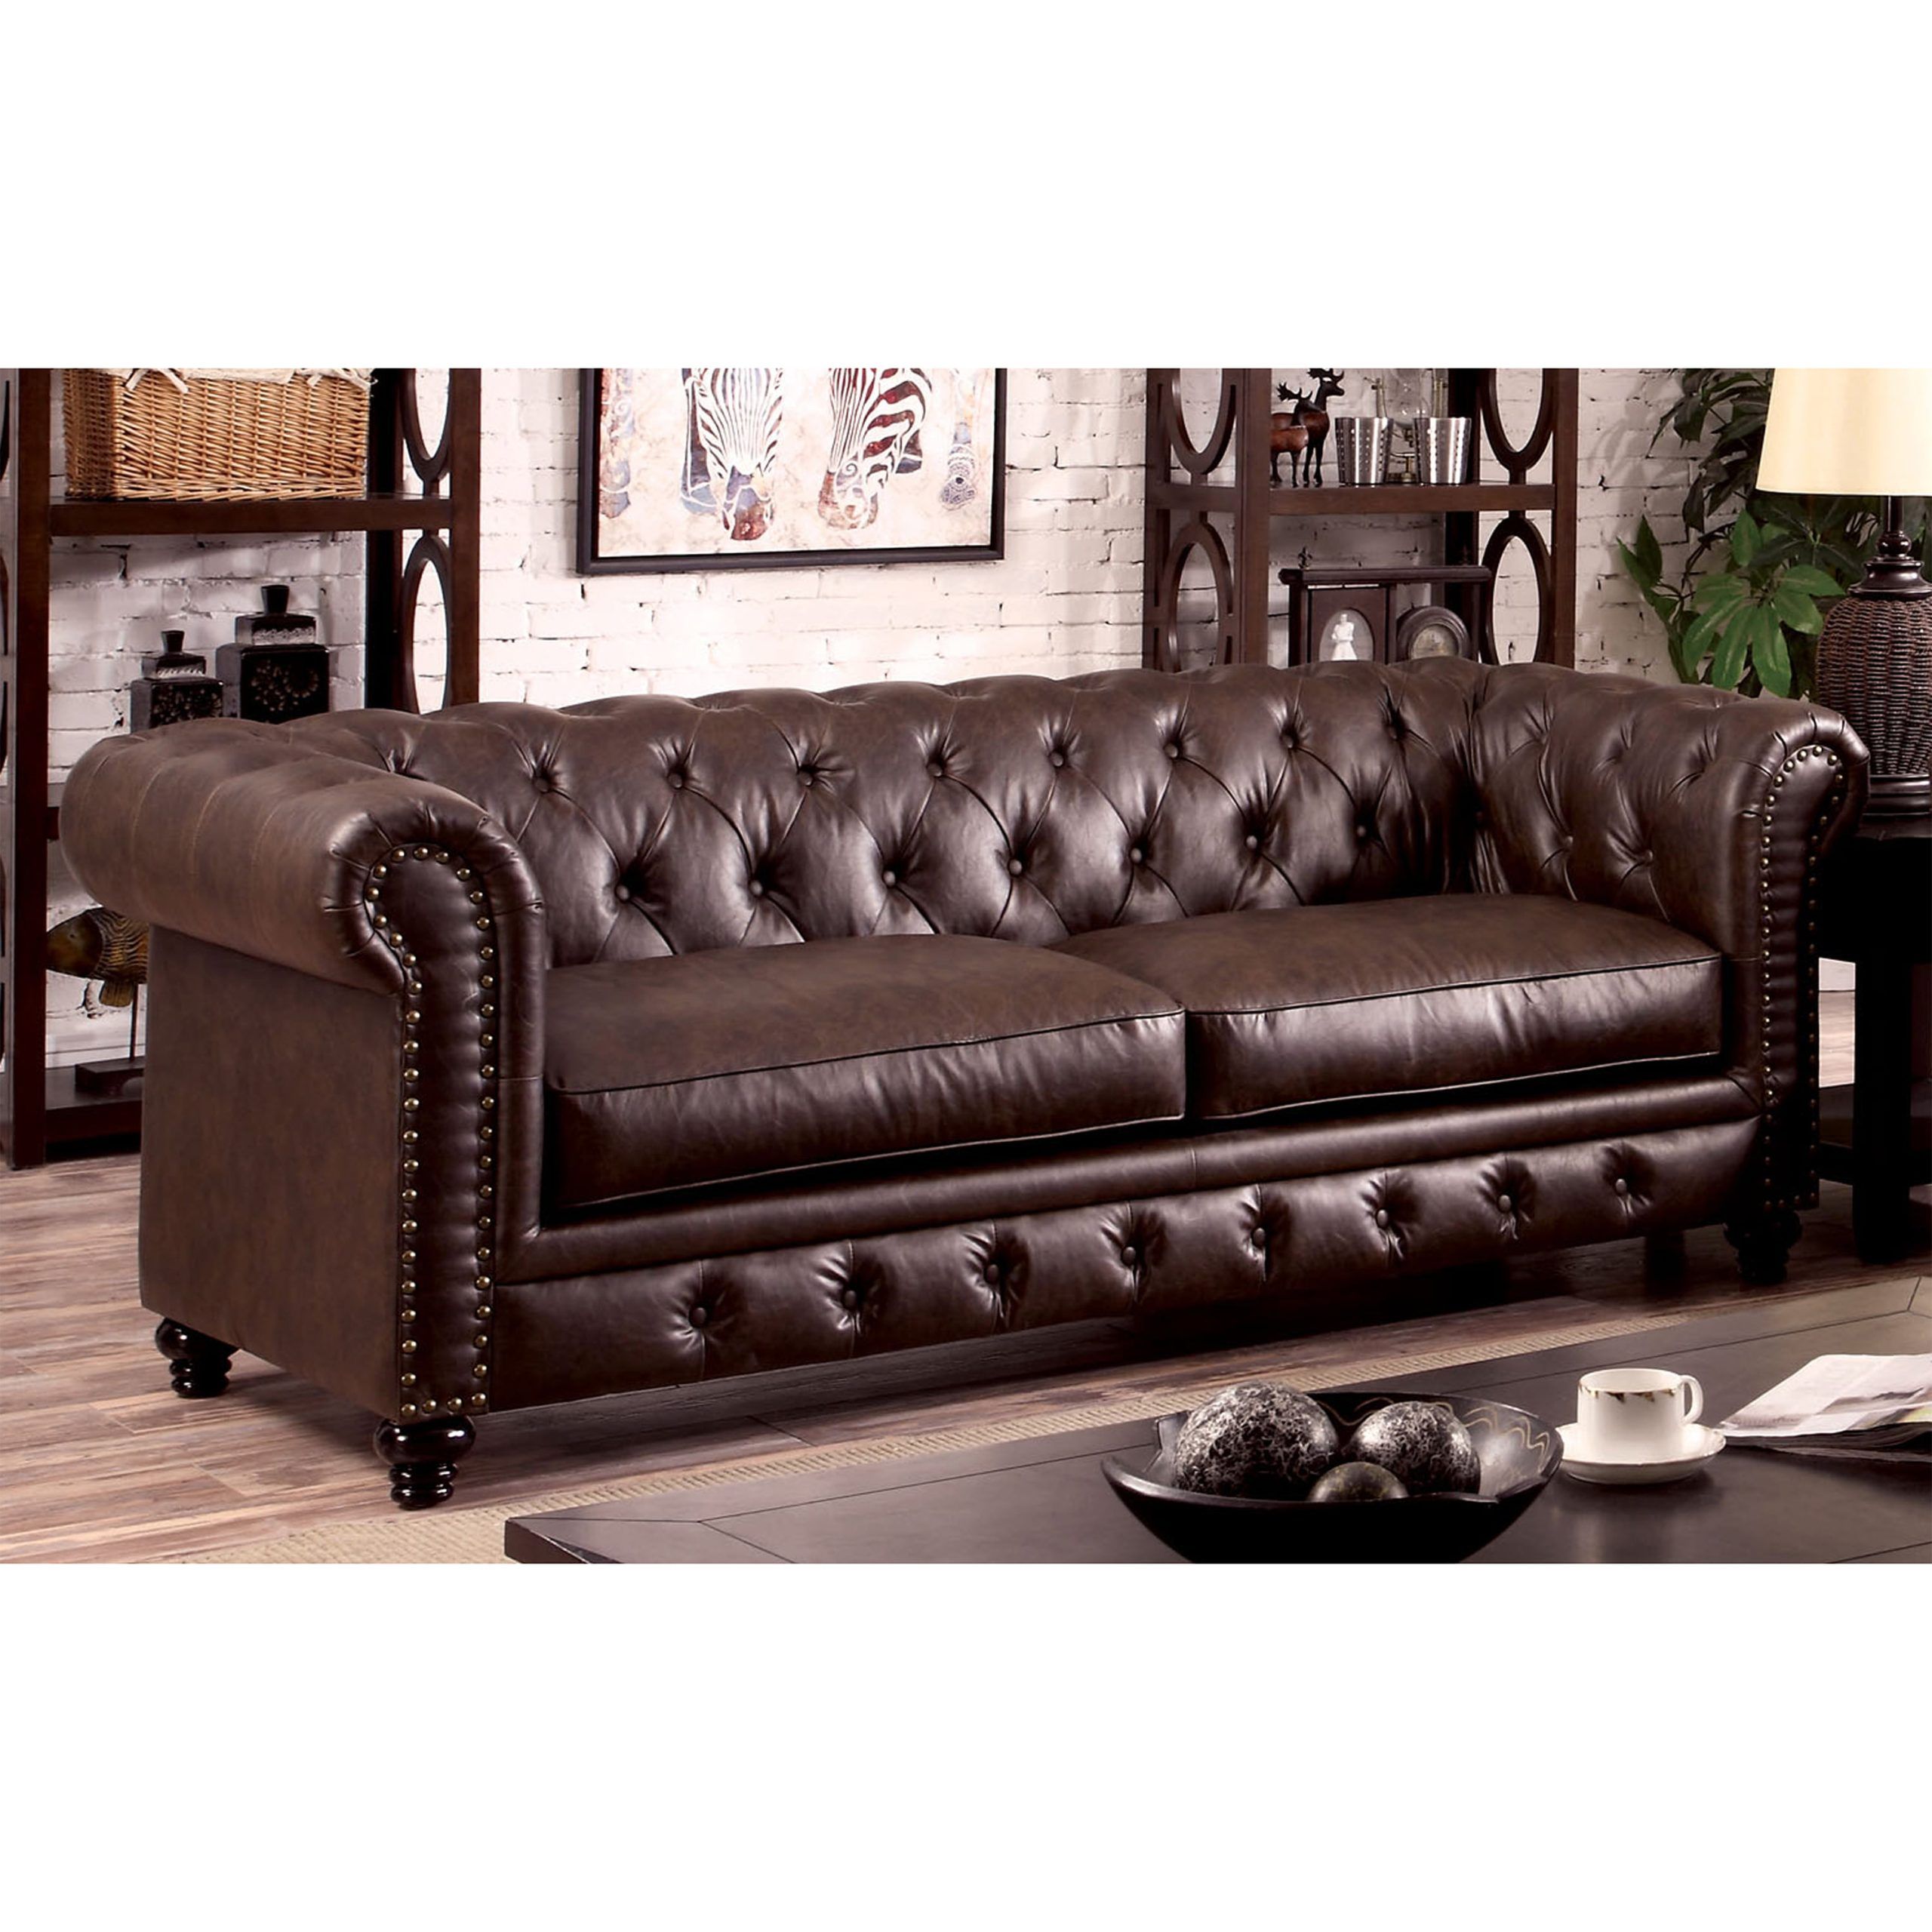 2017 Faux Leather Sofas In Chocolate Brown With Regard To Furniture Of America Tufted Glam Faux Leather Nyssa Tuxedo Sofa, Brown (View 13 of 15)